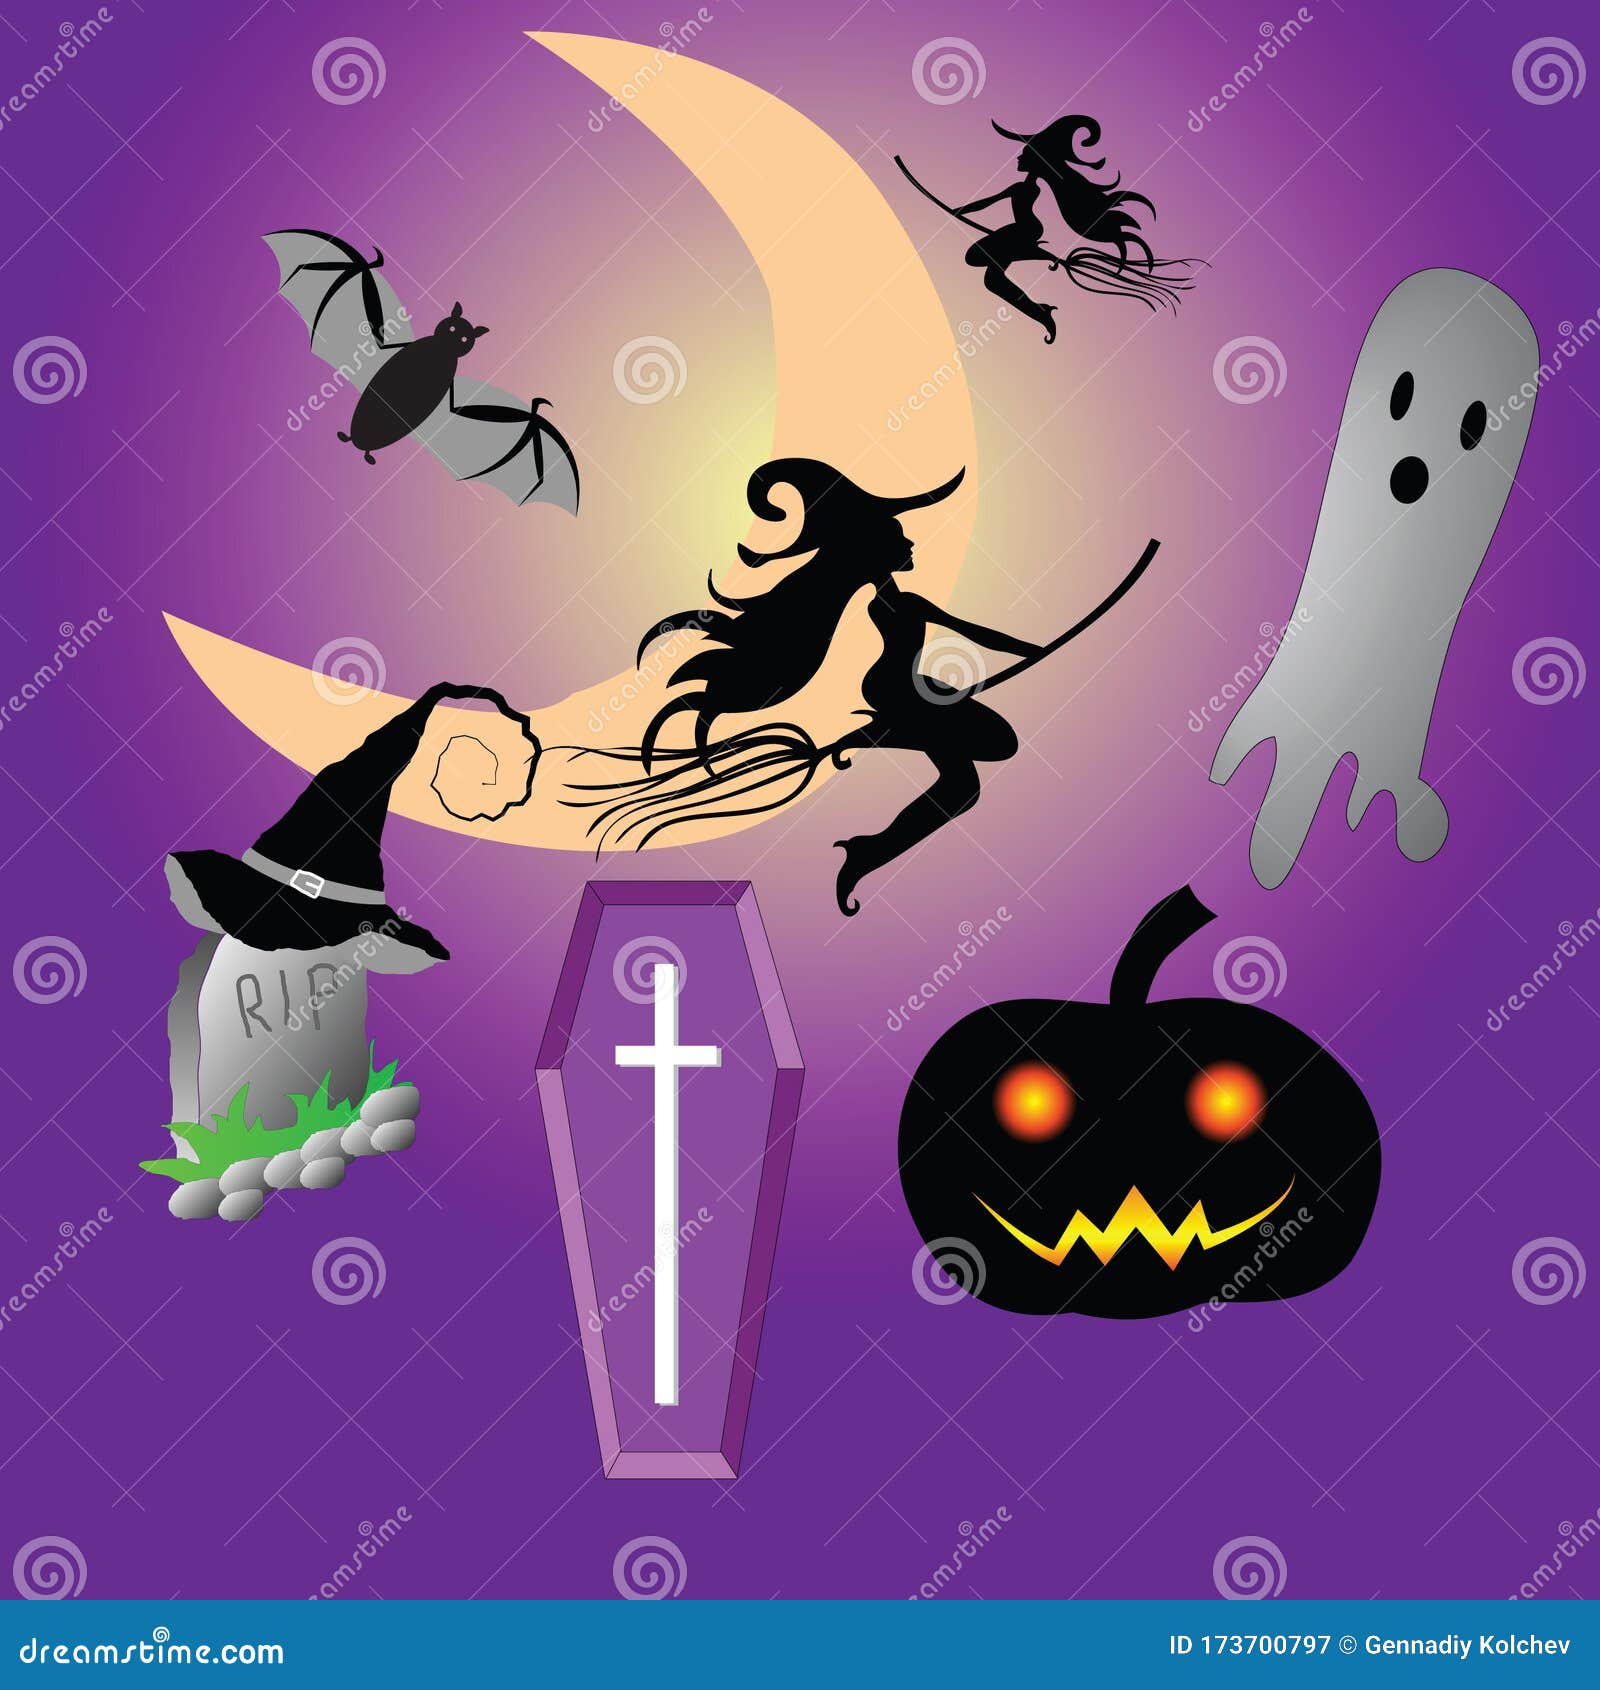 halloween merry  with witch, ghost and cemetery